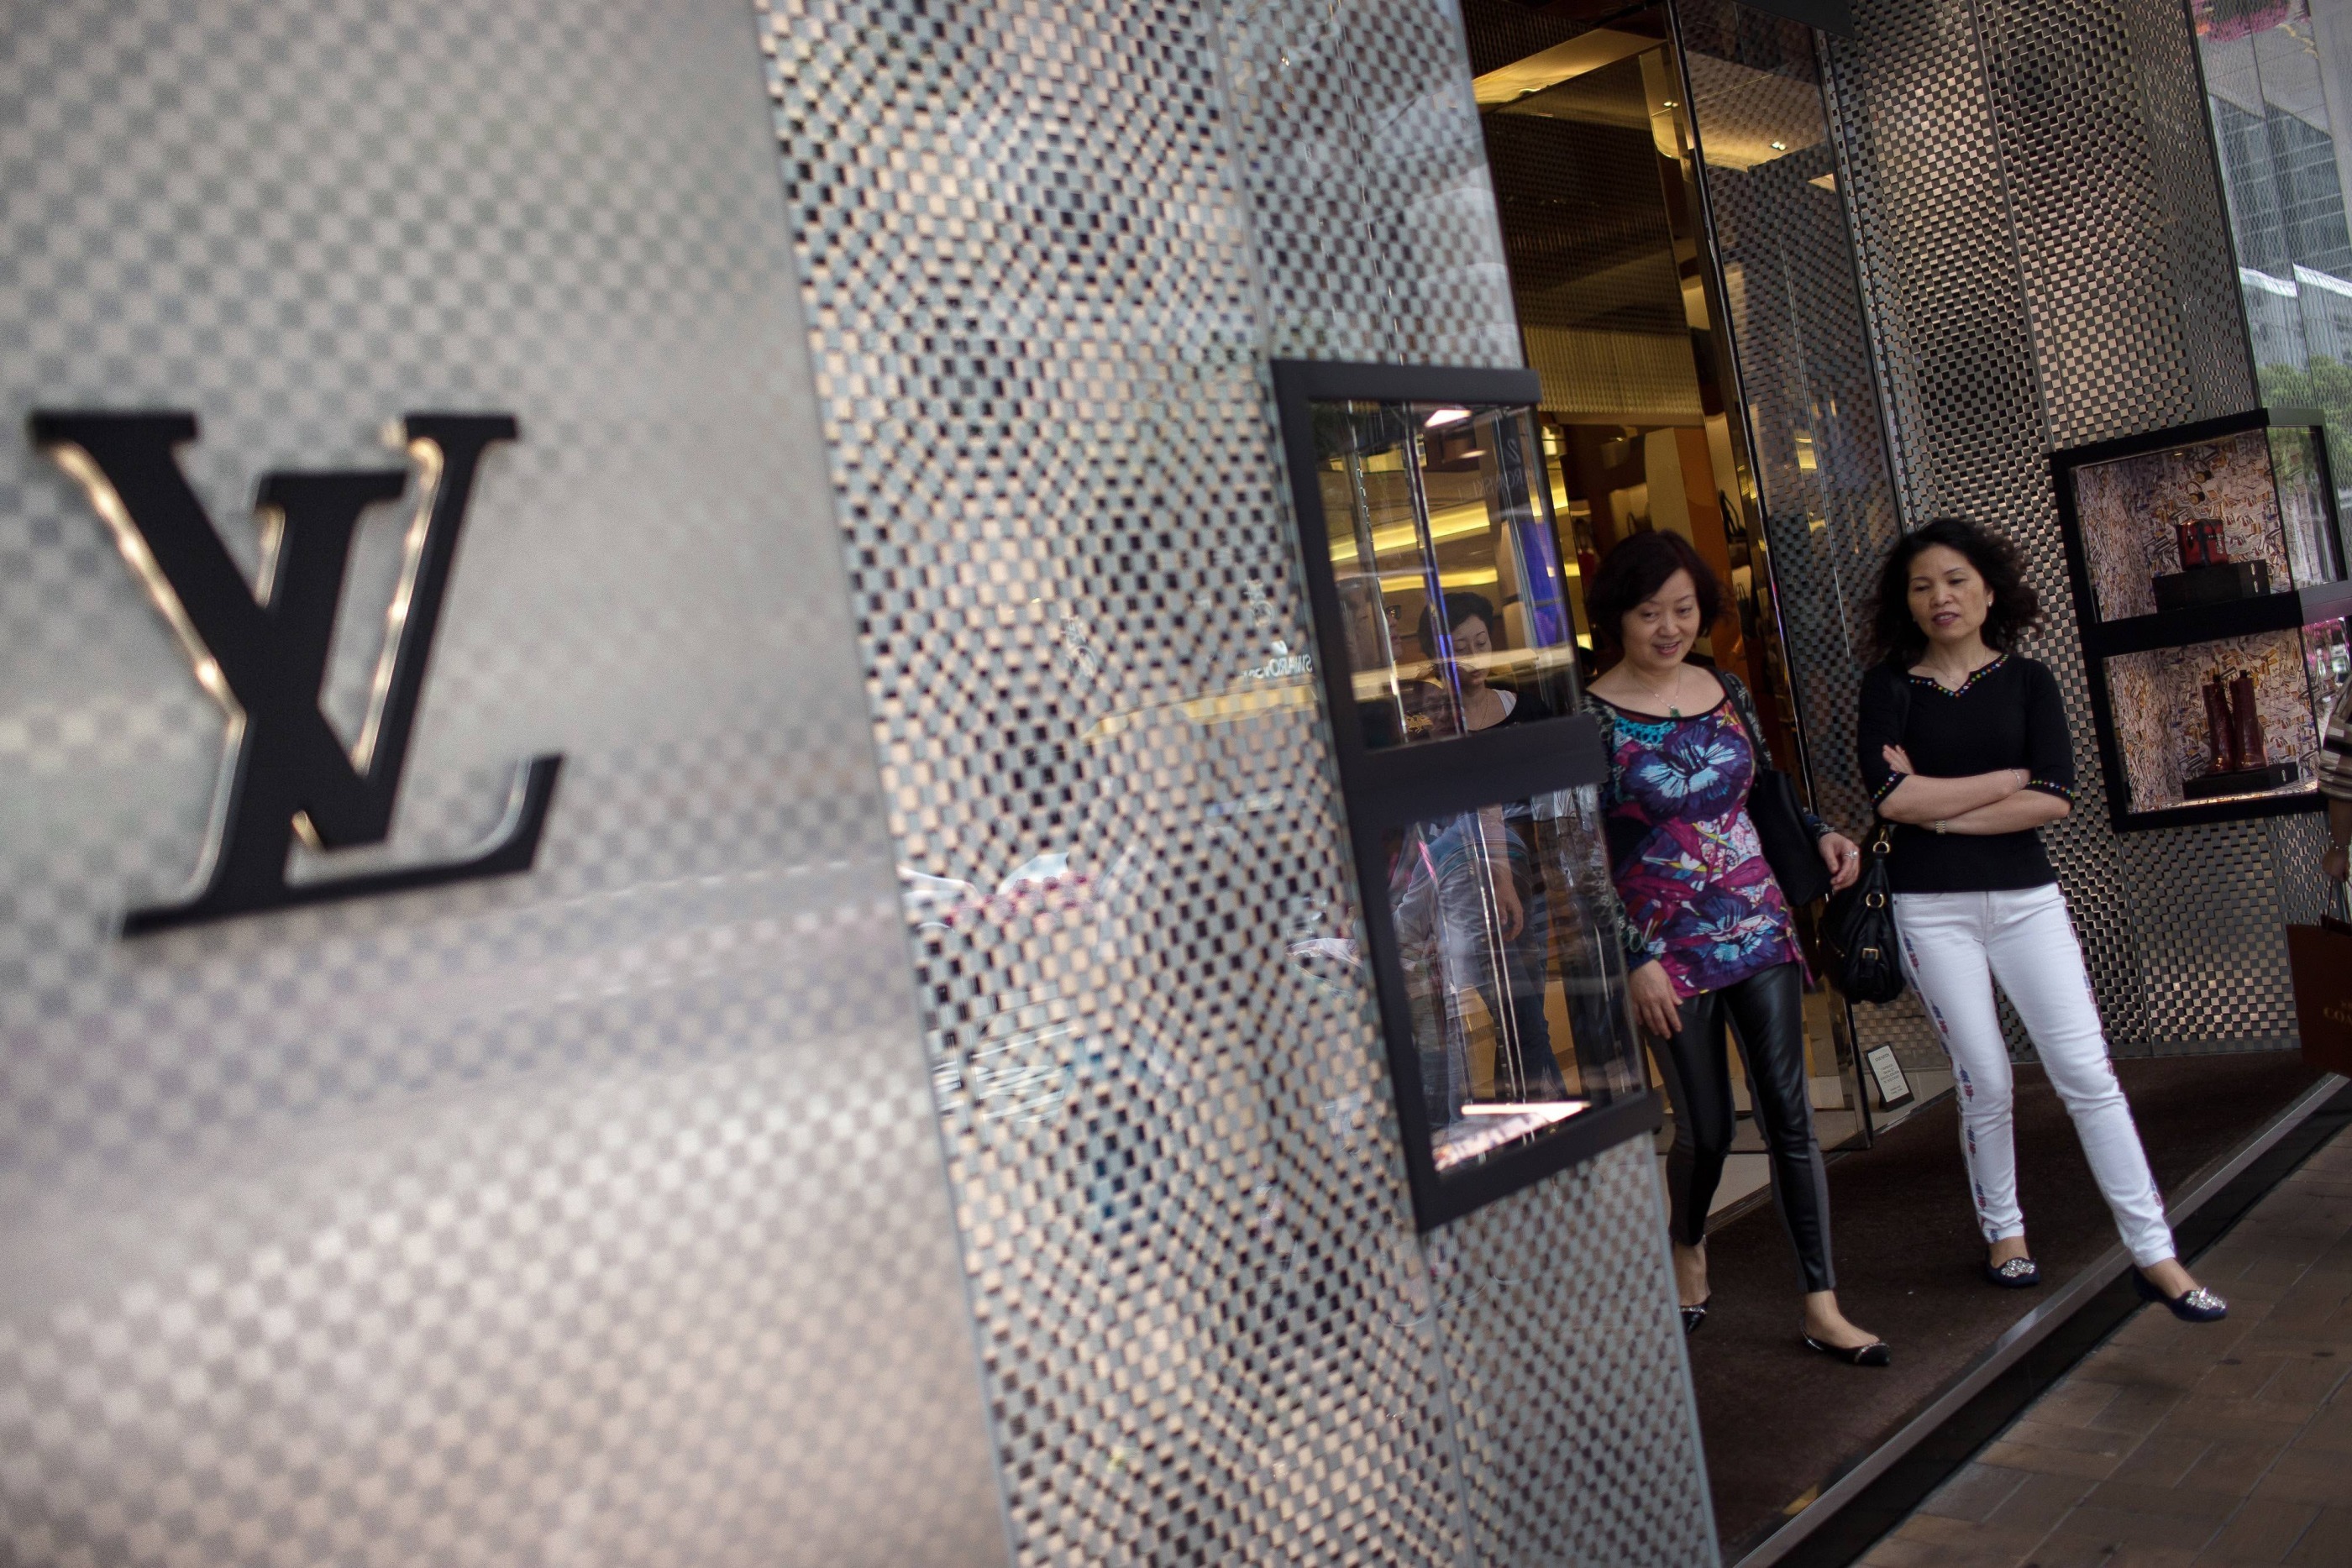 Travel Photo of The Week -- Louis Vuitton Store, Hong Kong: Then and Now